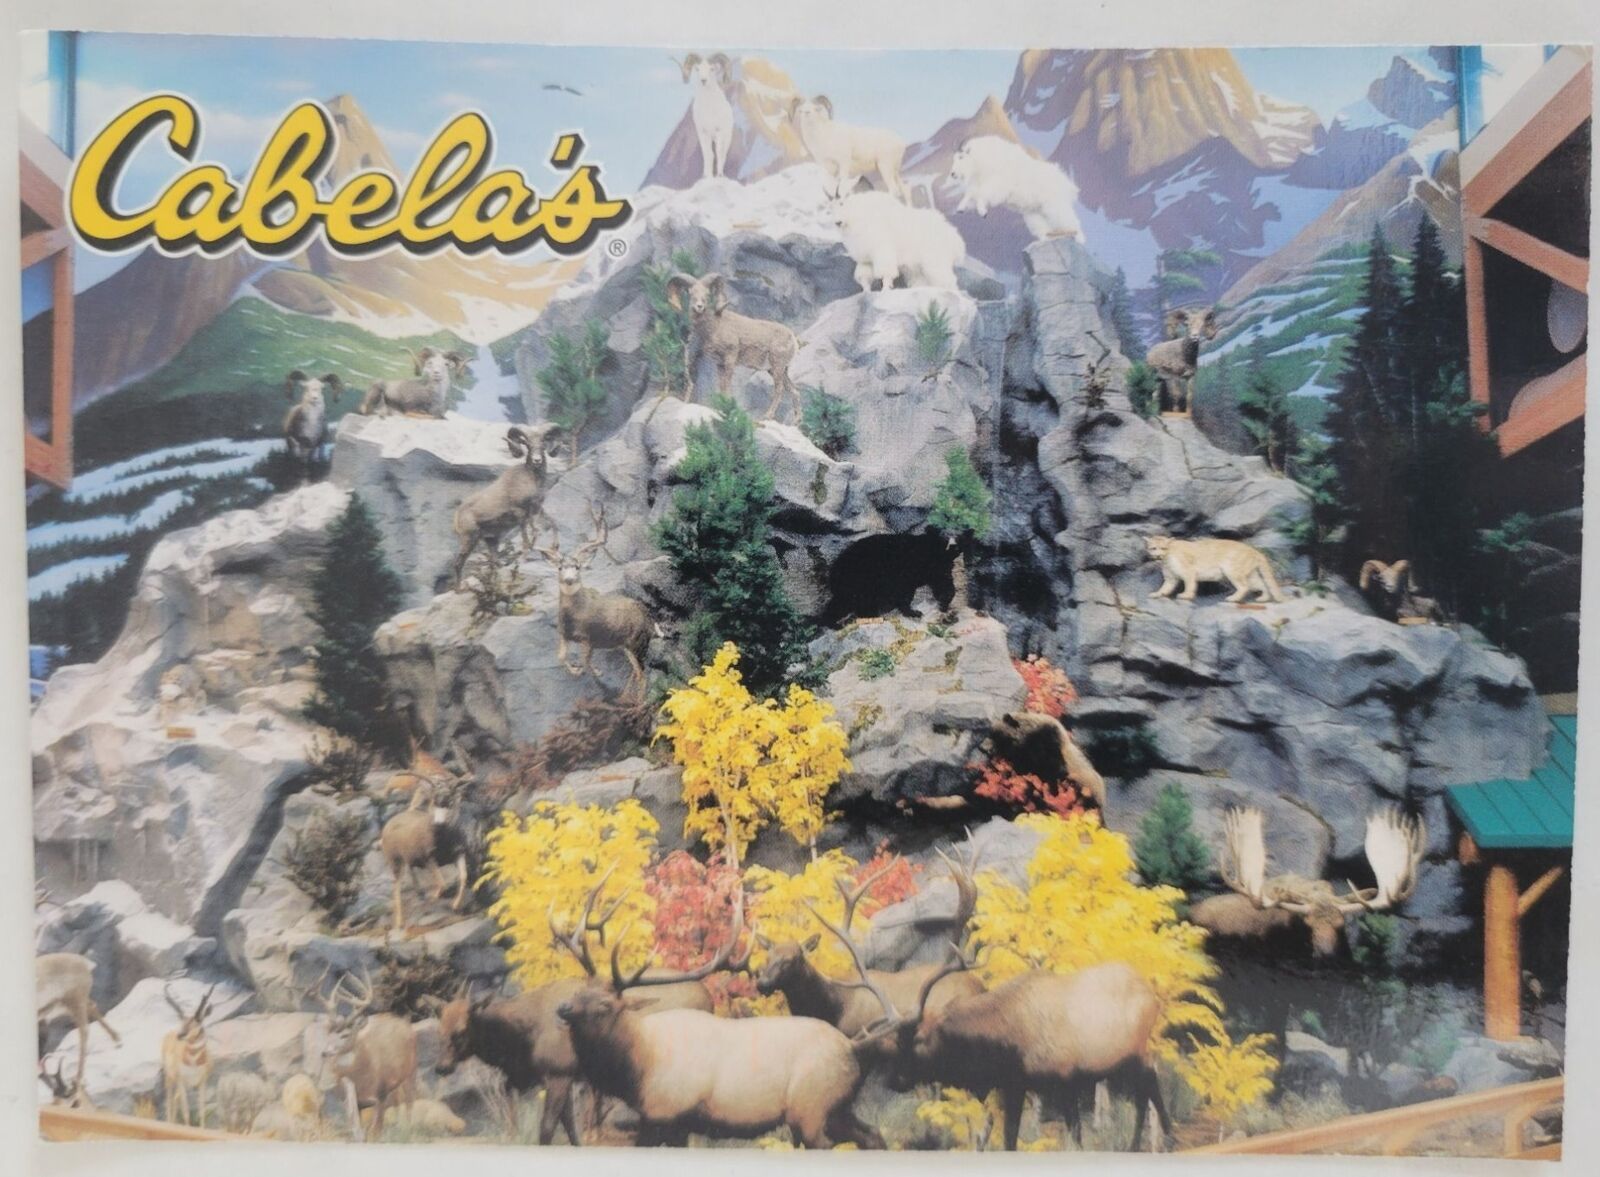 Conservation Mountain Store Display Cabelas Advertising Postcard 6X4 Posted